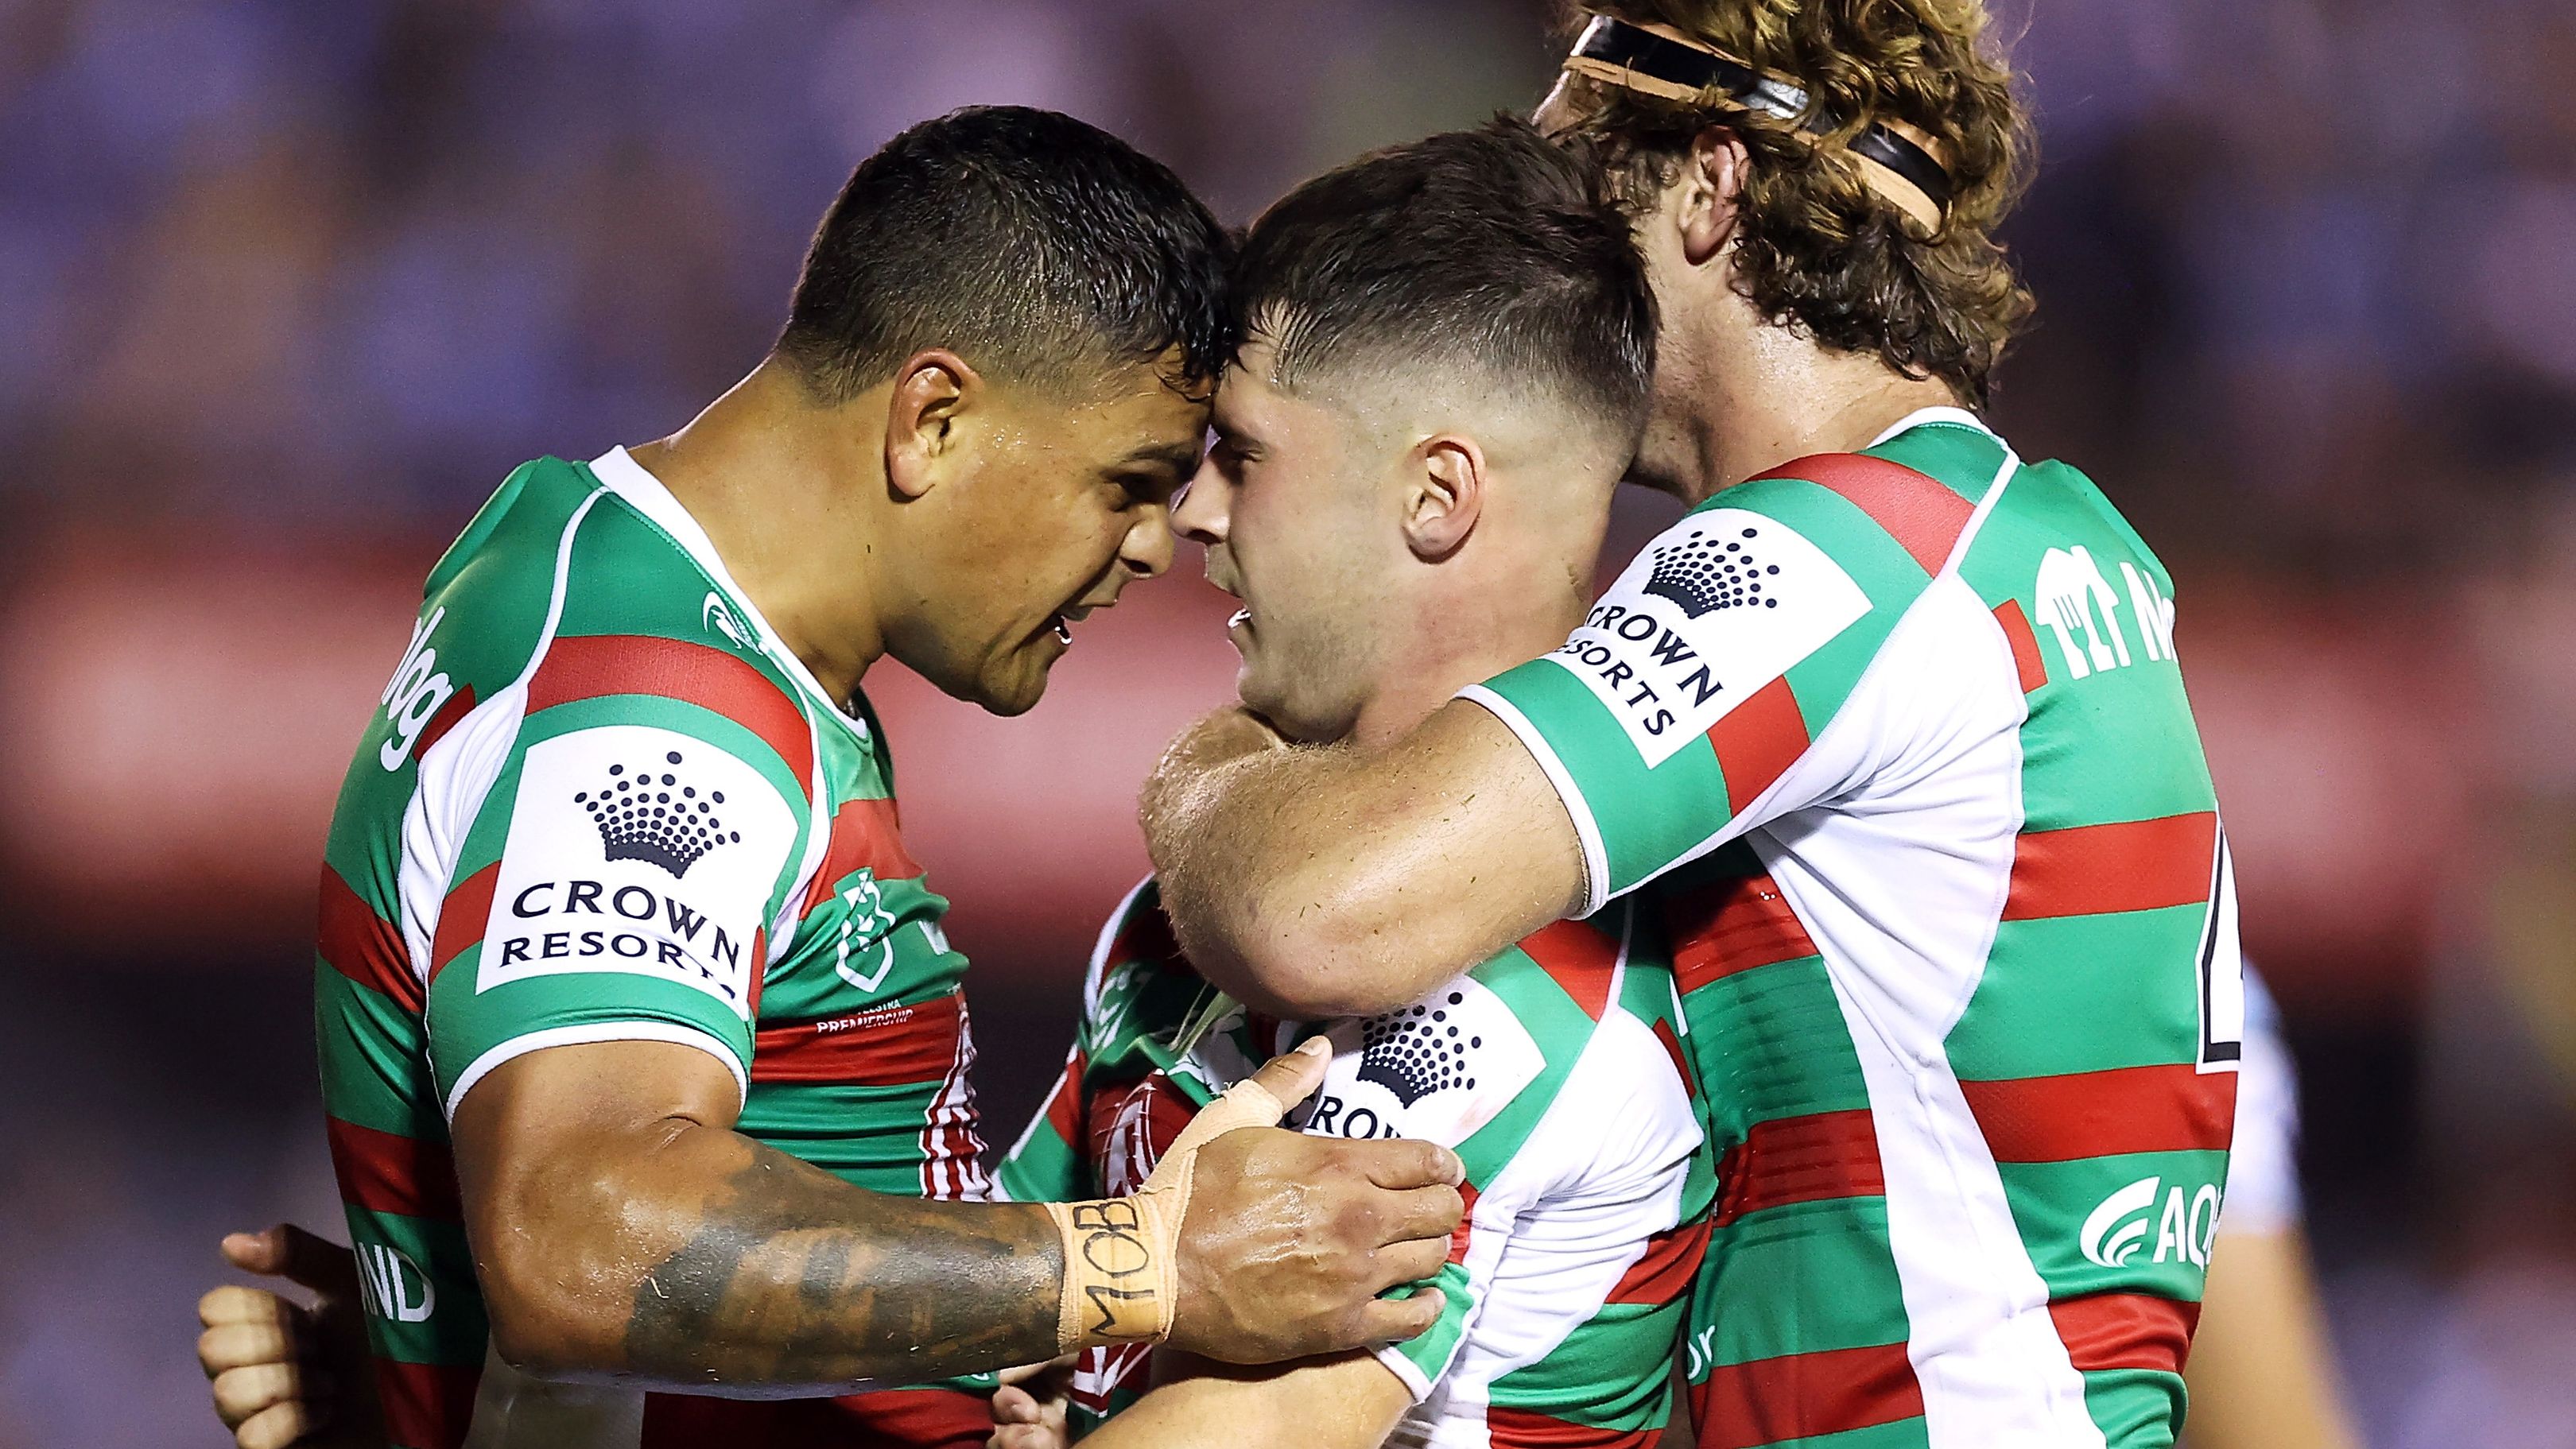 Latrell Mitchell (l) and Campbell Graham (r) of the Rabbitohs celebrate with Lachlan Ilias (c) of the Rabbitohs during the round one NRL match between Cronulla Sharks and South Sydney Rabbitohs at BlueBet Stadium on March 04, 2023 in Cronulla, Australia. (Photo by Mark Kolbe/Getty Images)